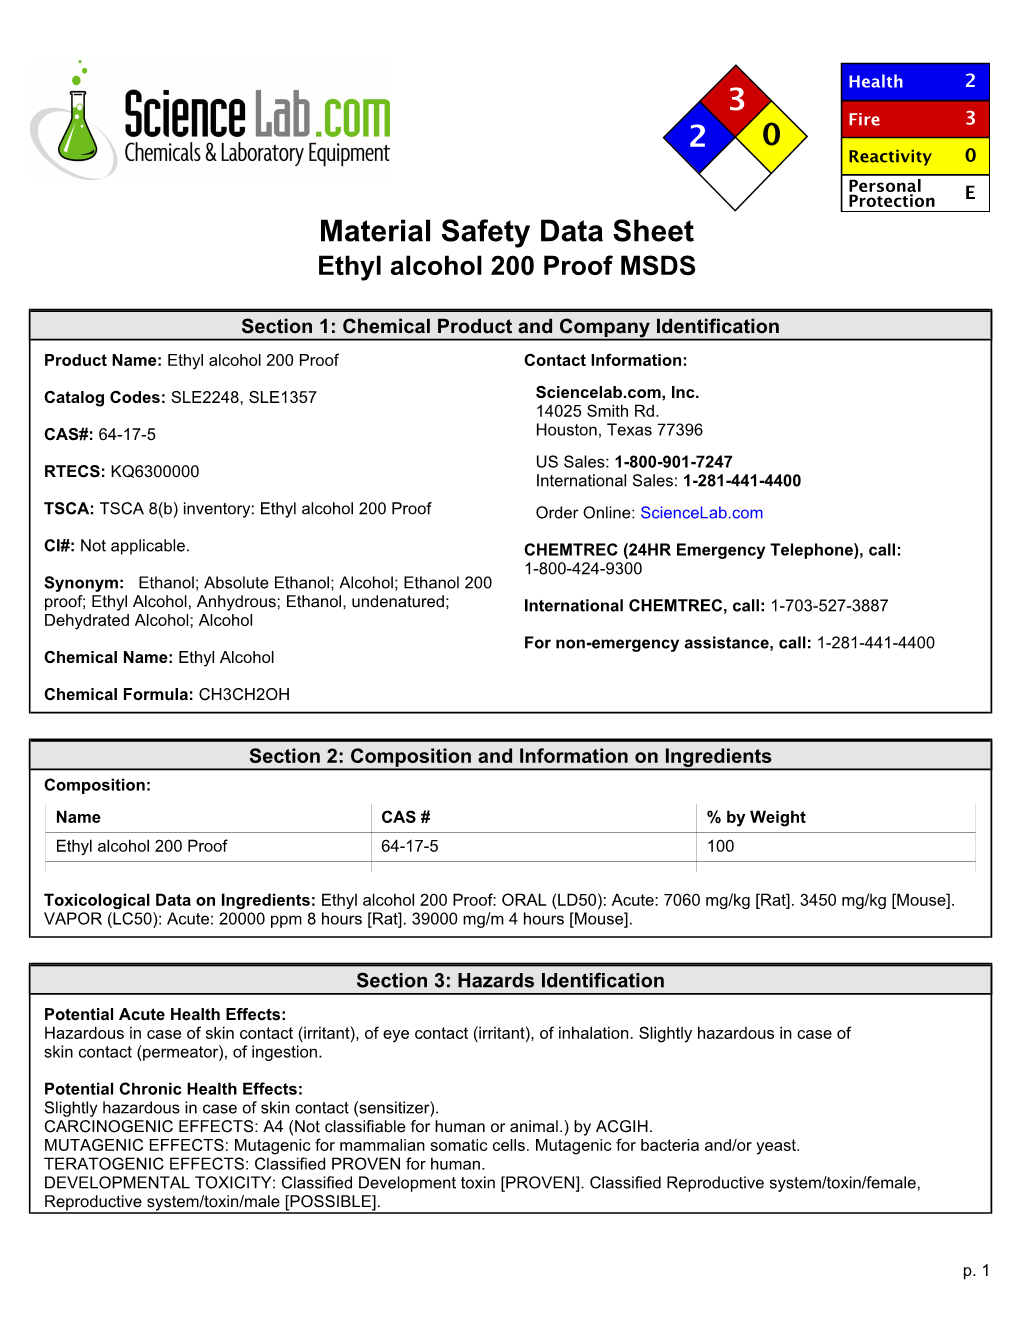 Material Safety Data Sheet Ethyl Alcohol 200 Proof MSDS